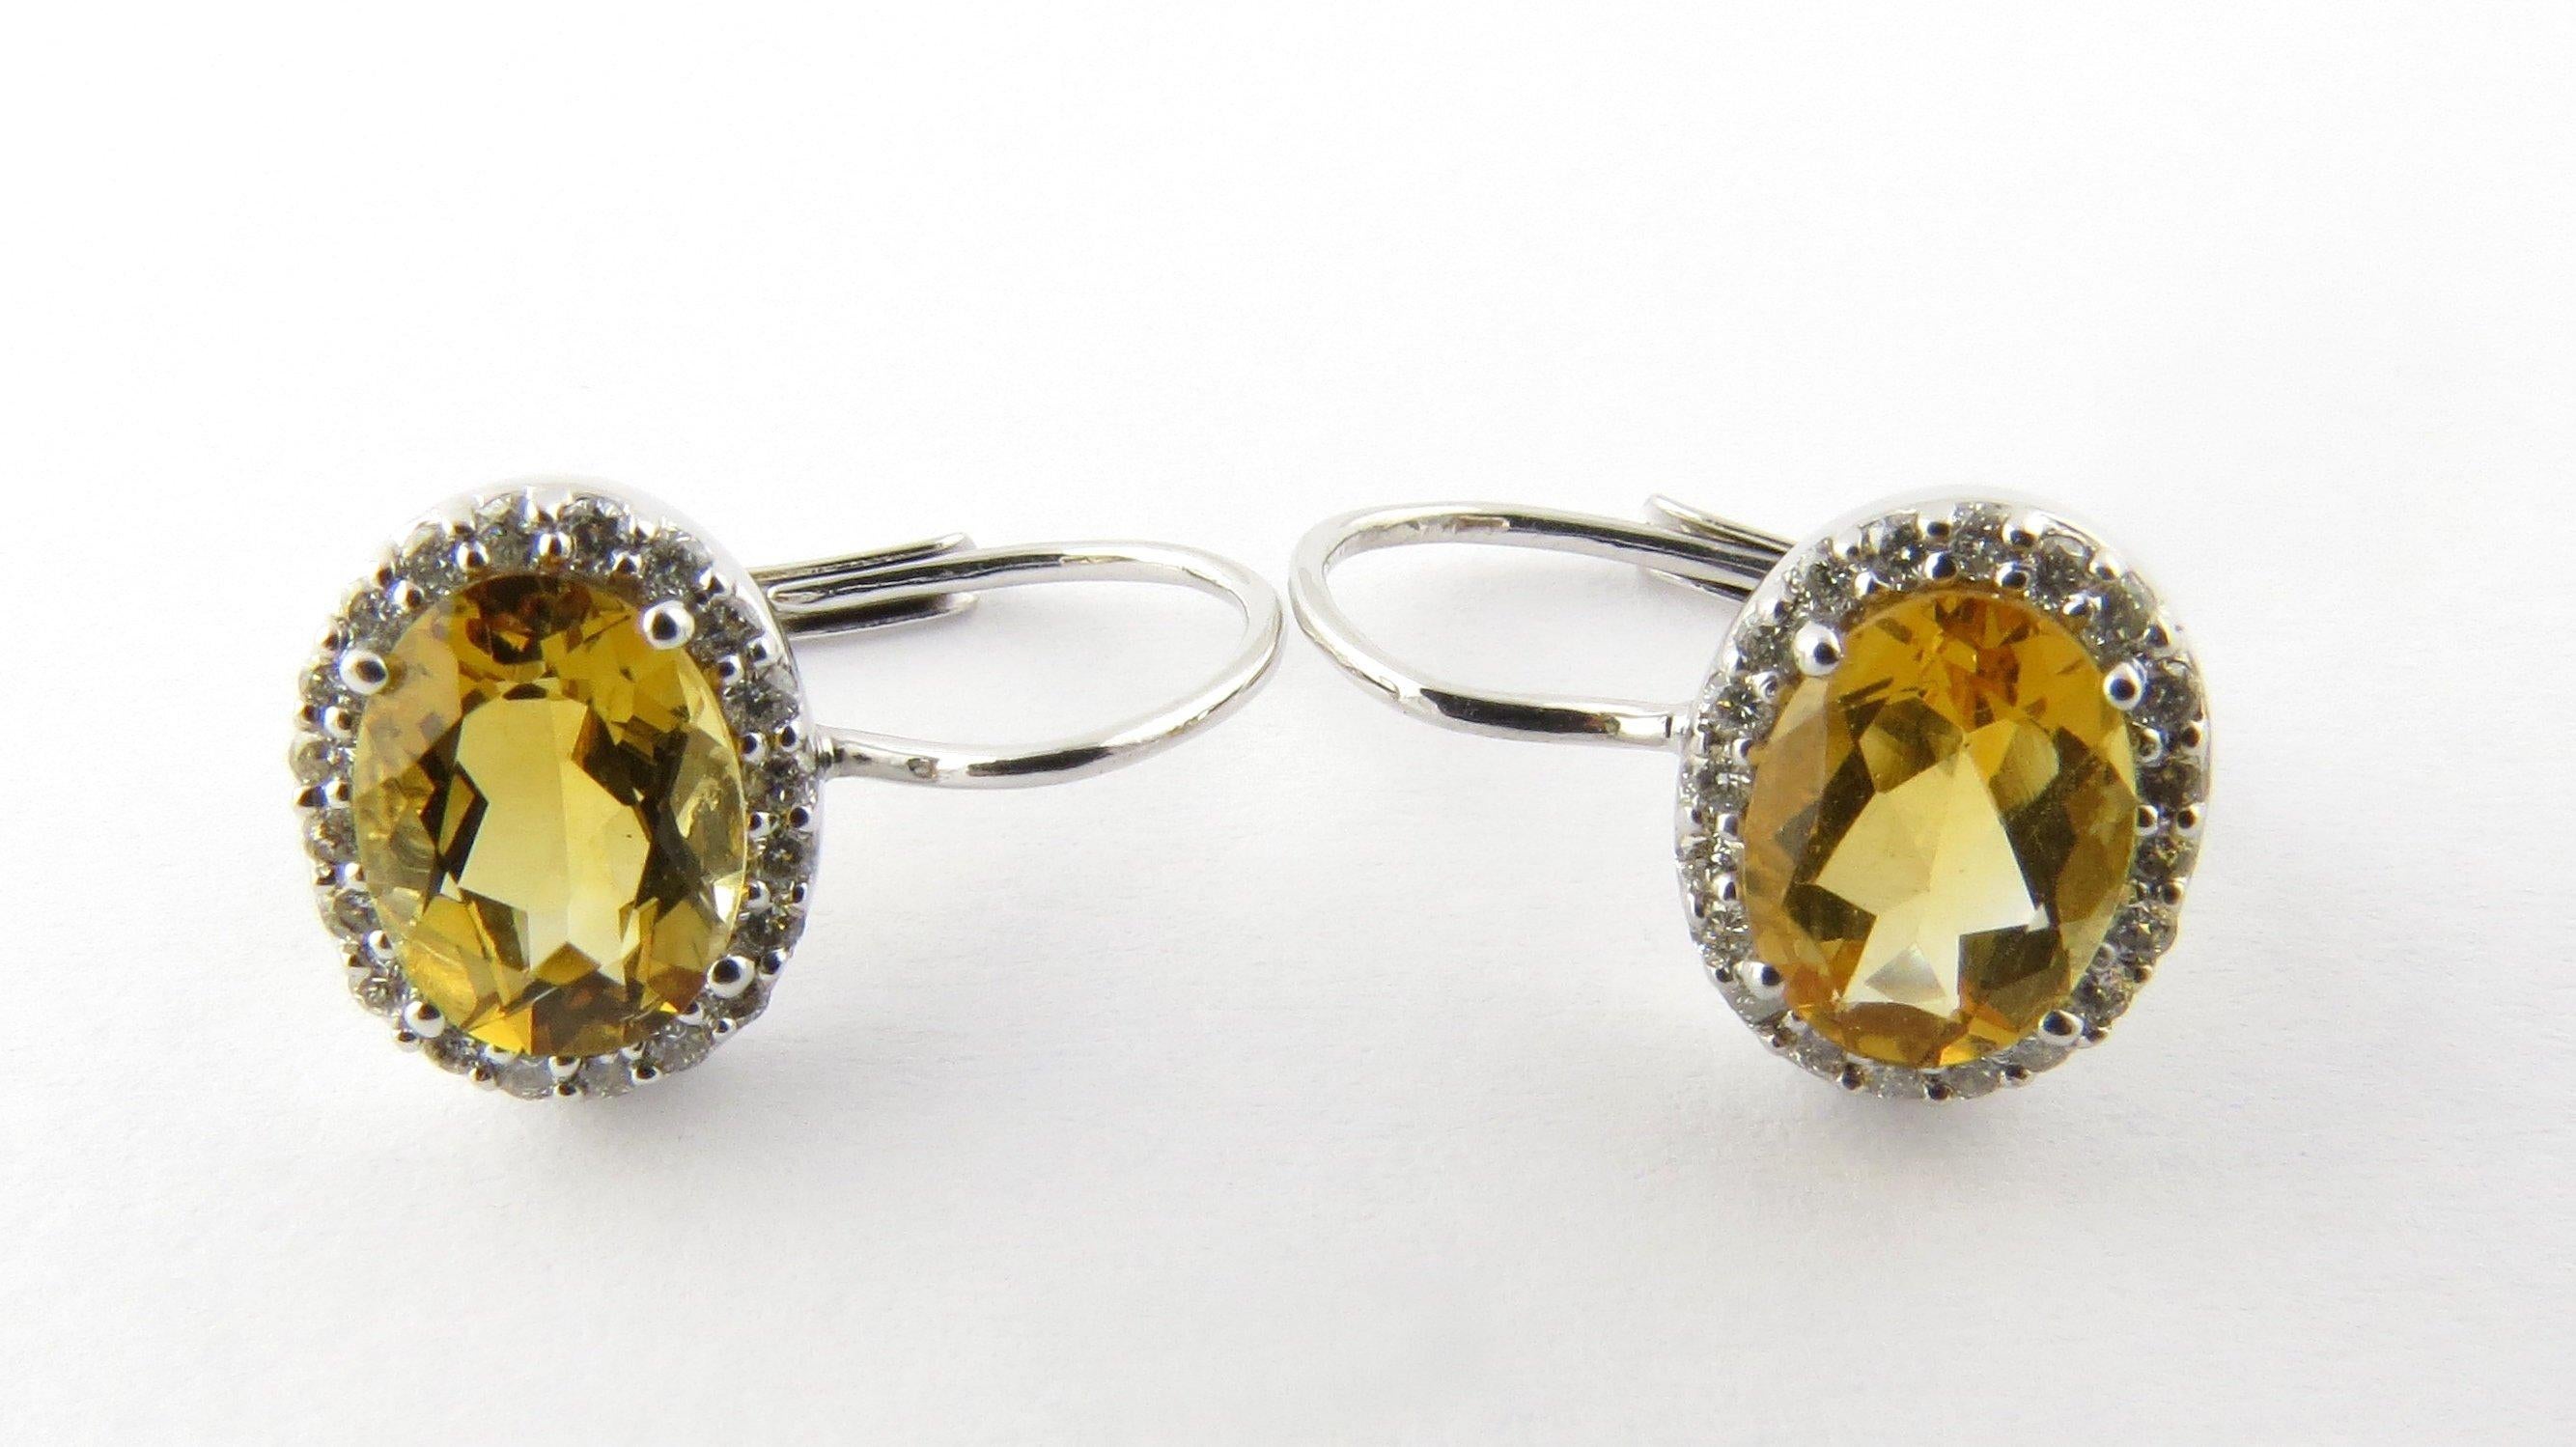 Vintage 14 Karat White Gold Citrine and Diamond Earrings- 
These stunning earrings each feature one oval citrine stone (8 mm x 6 mm) surrounded by 20 round brilliant cut diamonds set in classic 14K white gold. Hinge back closures. 
Matching ring: